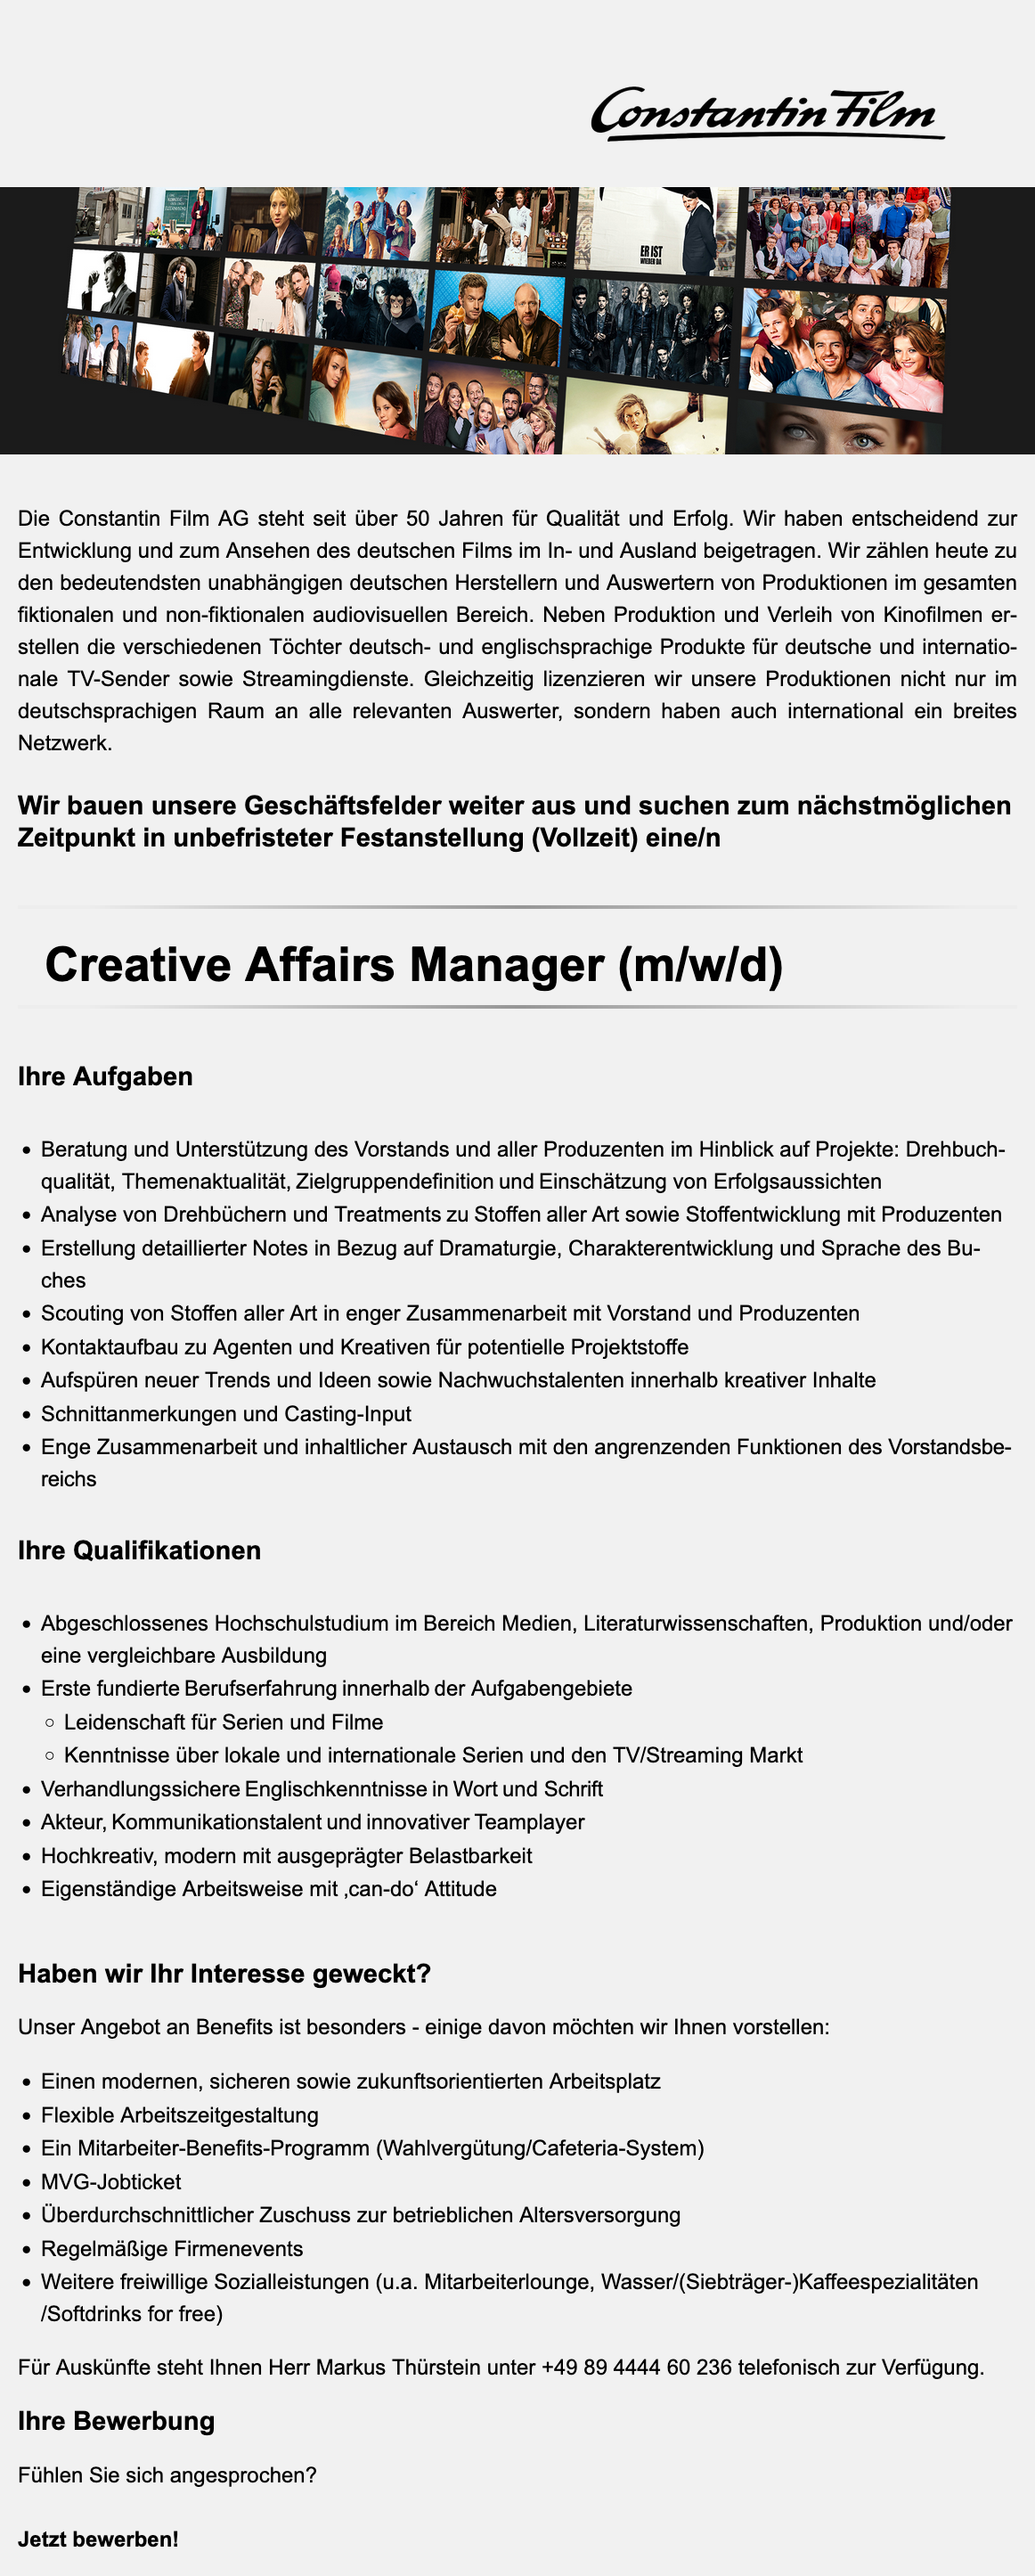 Creative Affairs Manager*in (m/w/d)